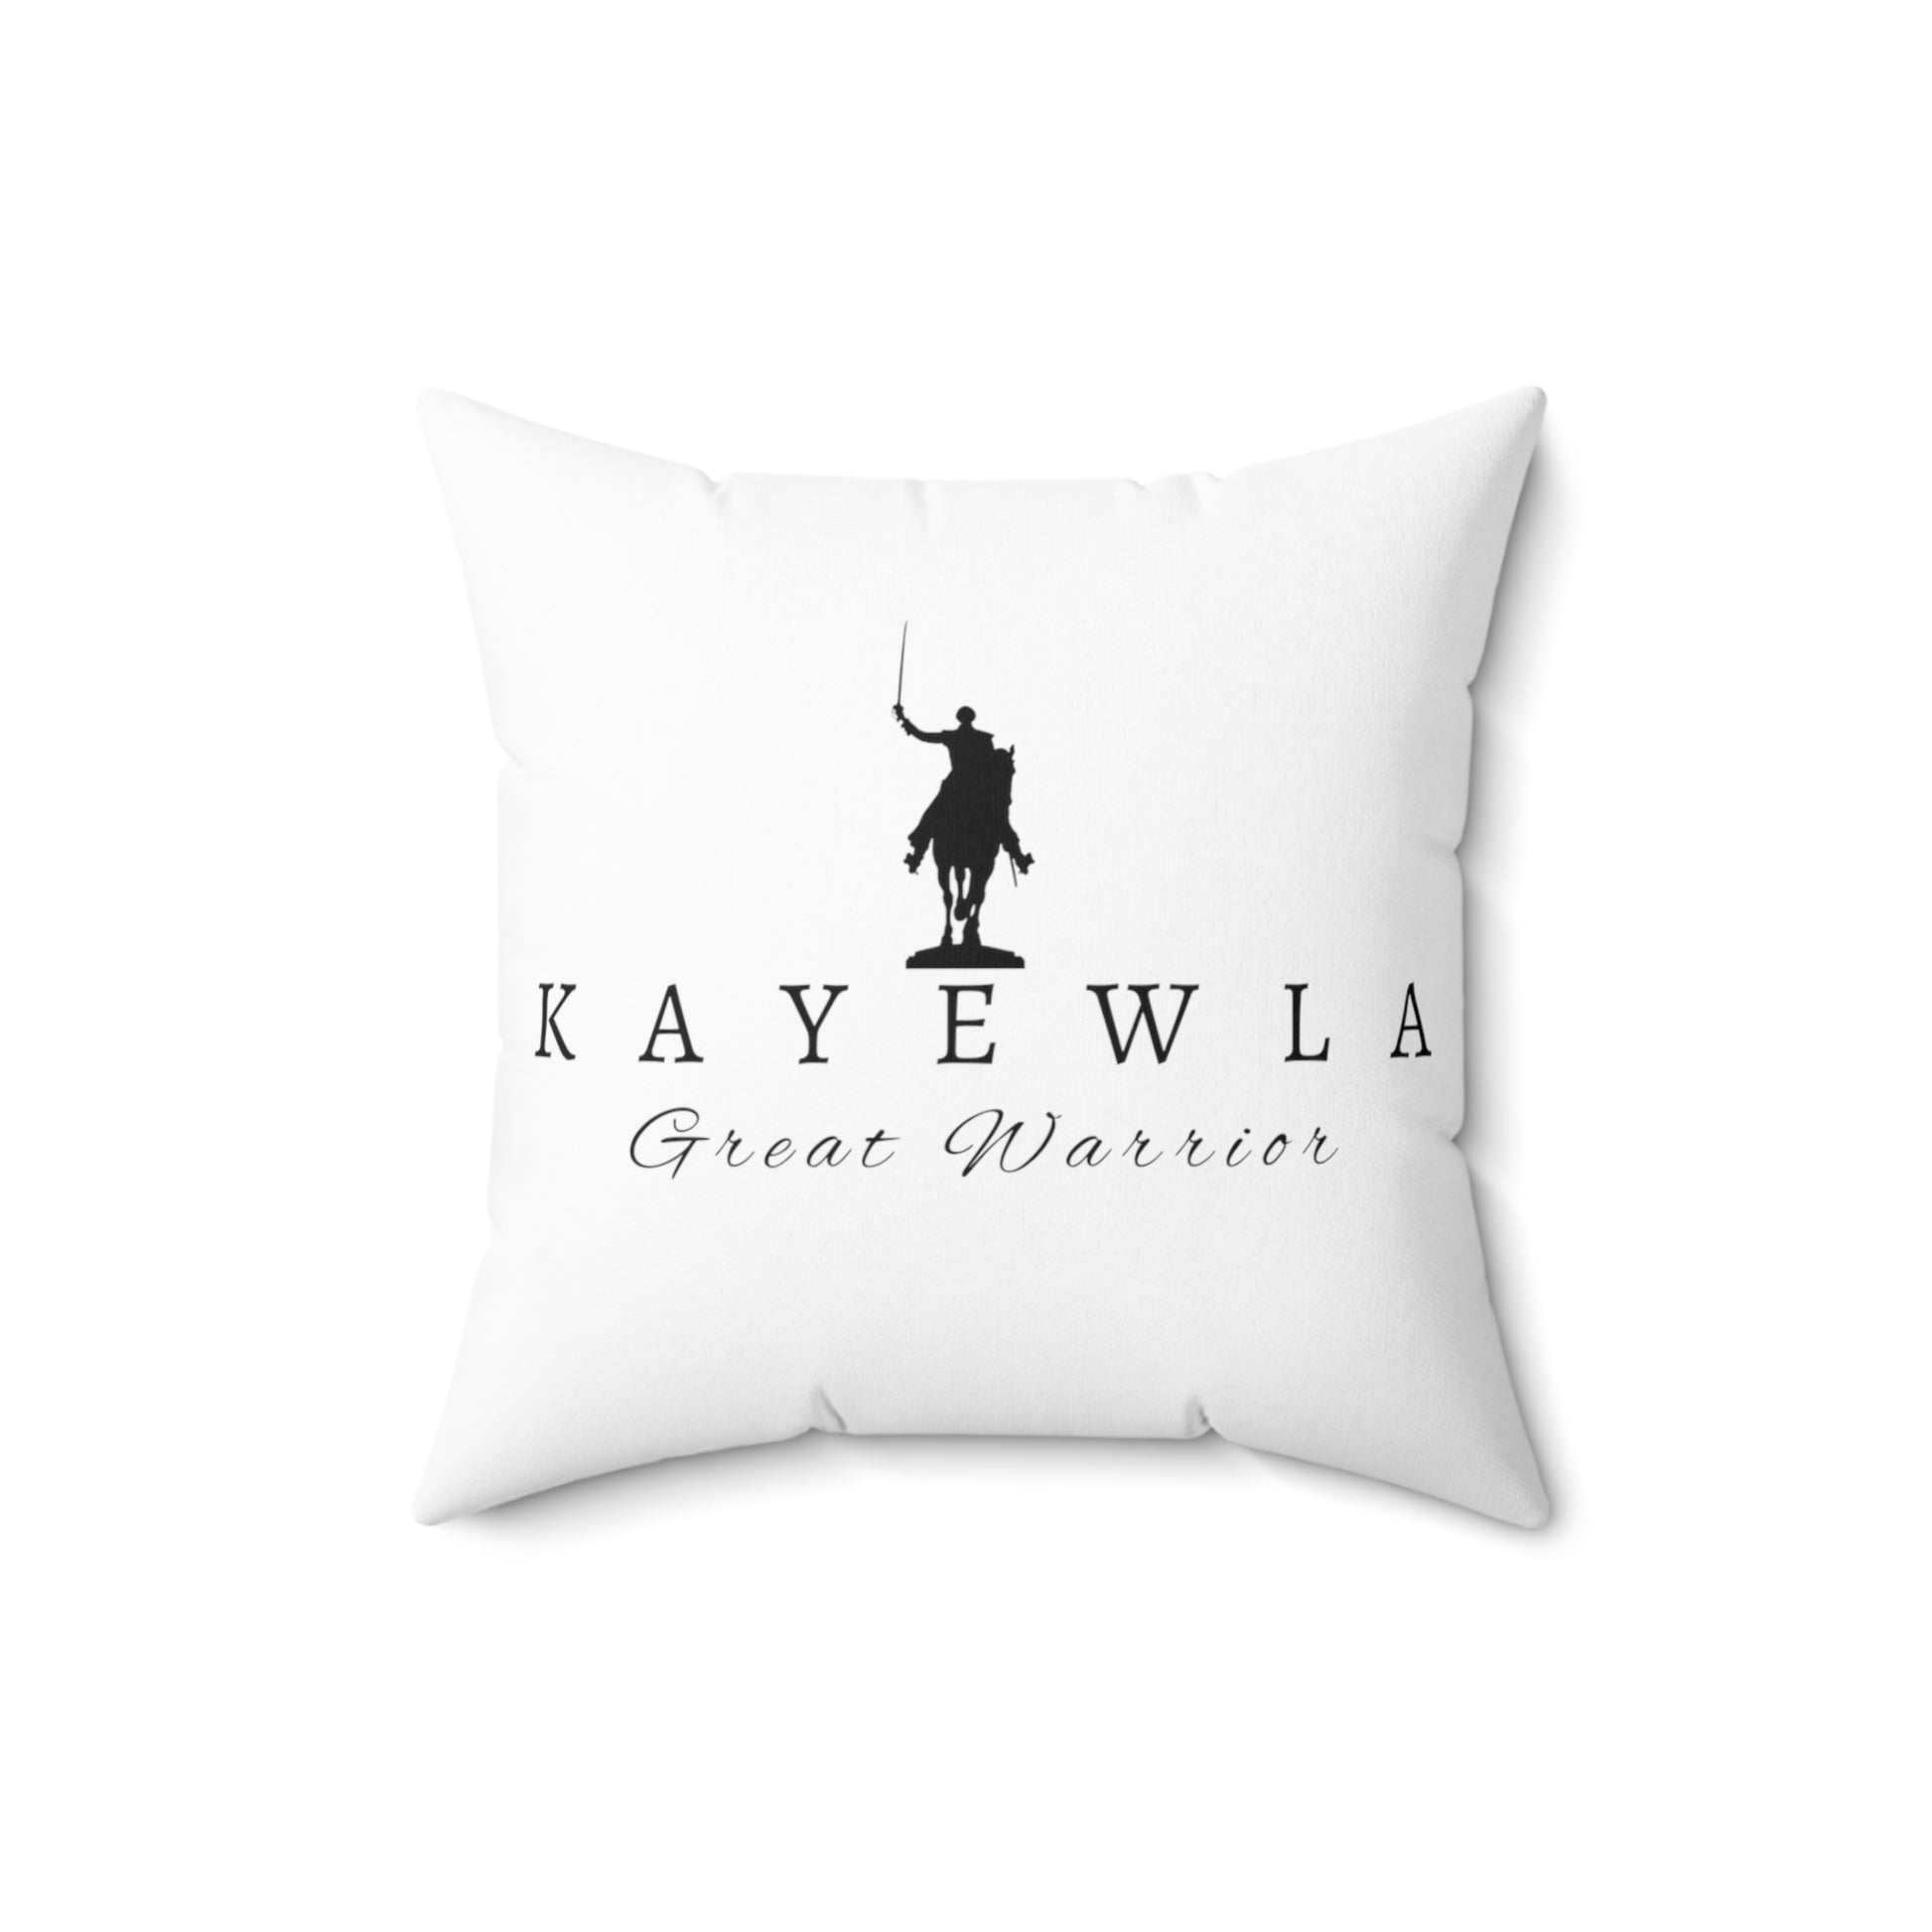 Lafayette Pillow with image of the Marquis de Lafayette and Kayewla name Great Warrior